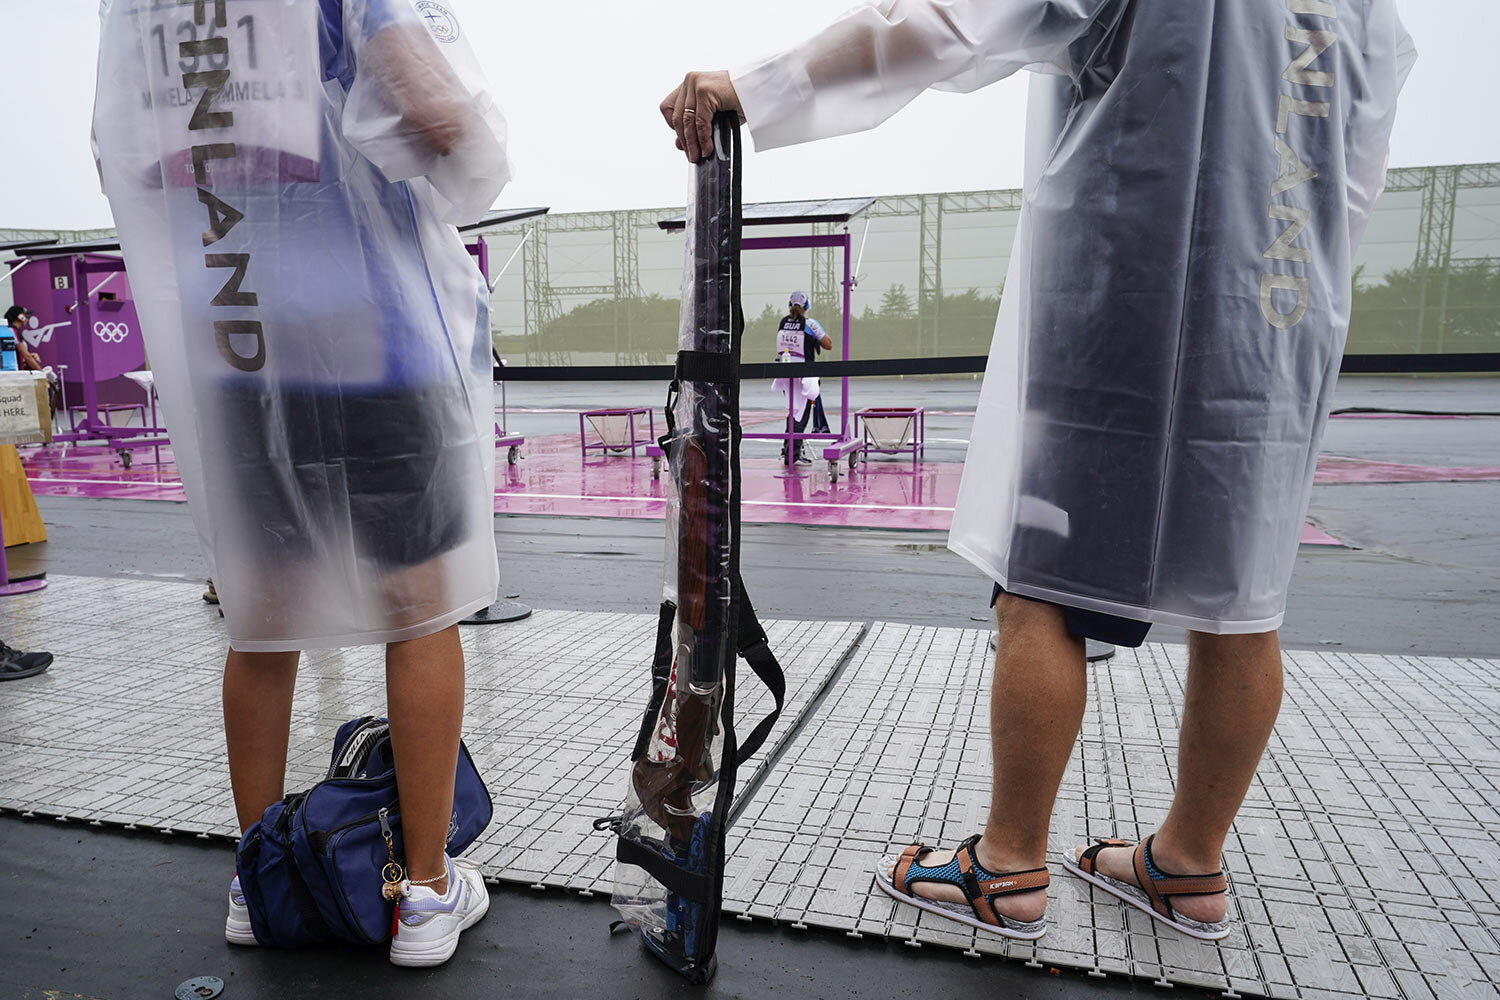  Satu Makela-Nummela, left, of Finland, with her coach, uses a protective rain cover for her shotgun before practice for the women's trap at the Asaka Shooting Range in the 2020 Summer Olympics, Tuesday, July 27, 2021, in Tokyo, Japan. (AP Photo/Alex